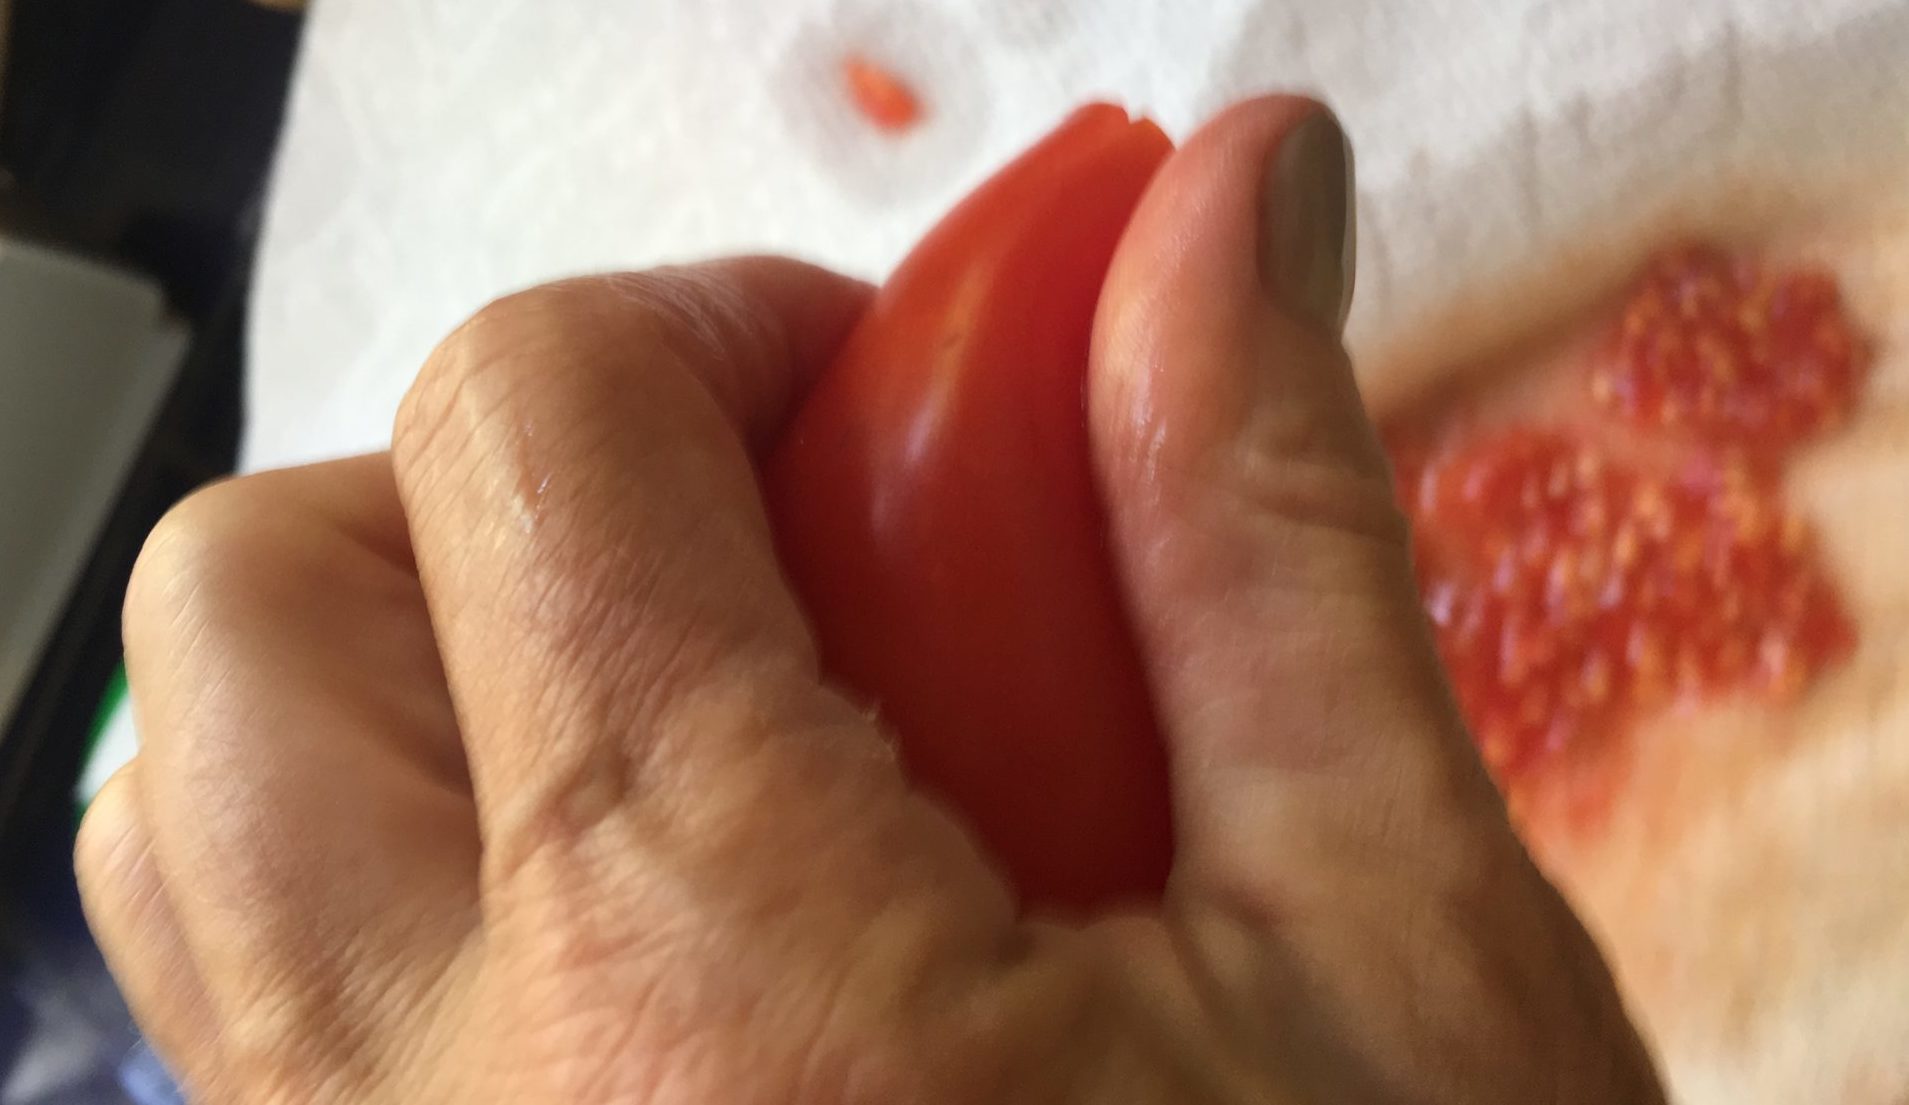 Seeding a tomato by hand